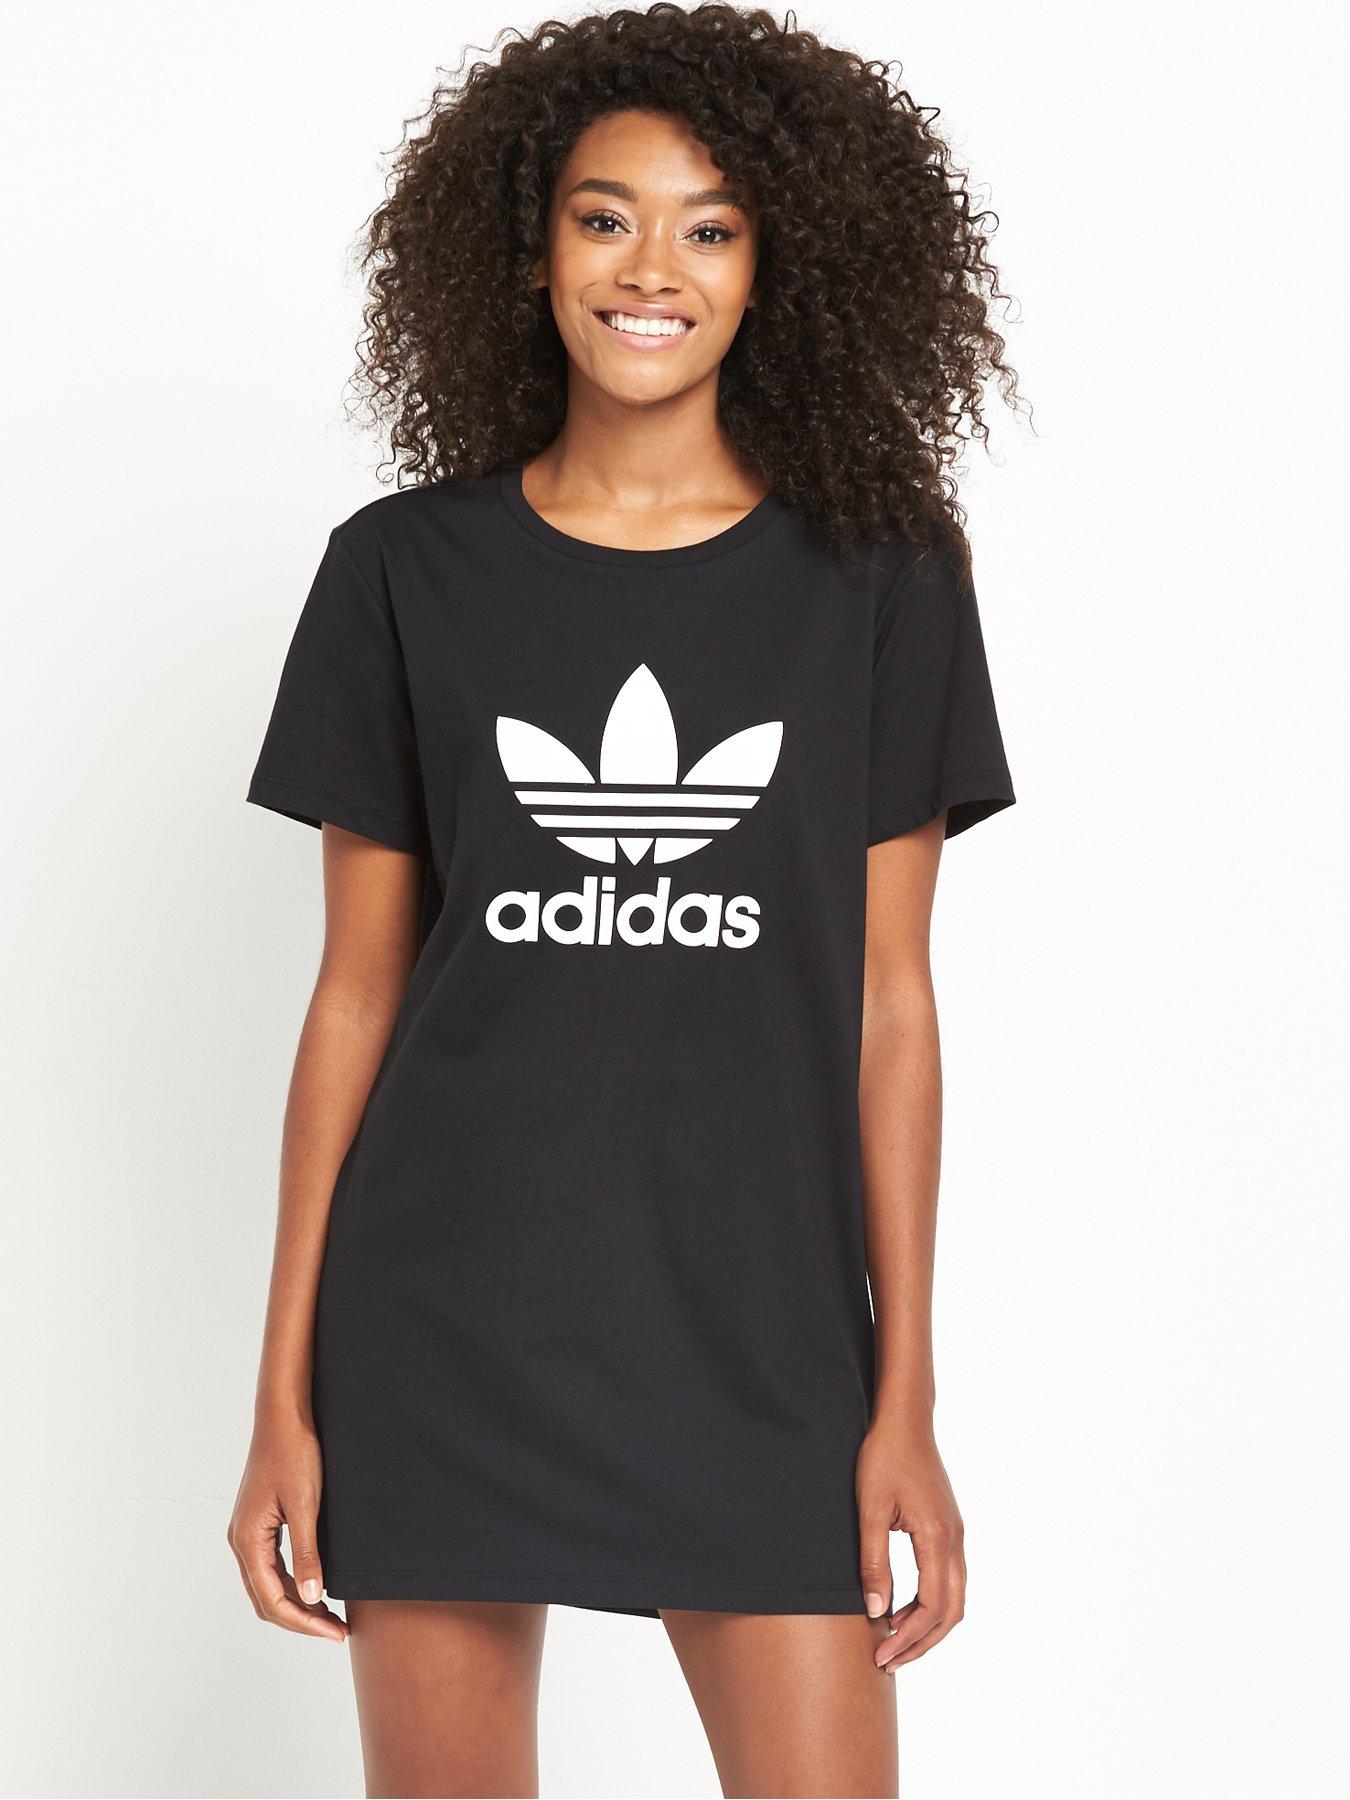 adidas originals moscow t shirt dress with floral trefoil print